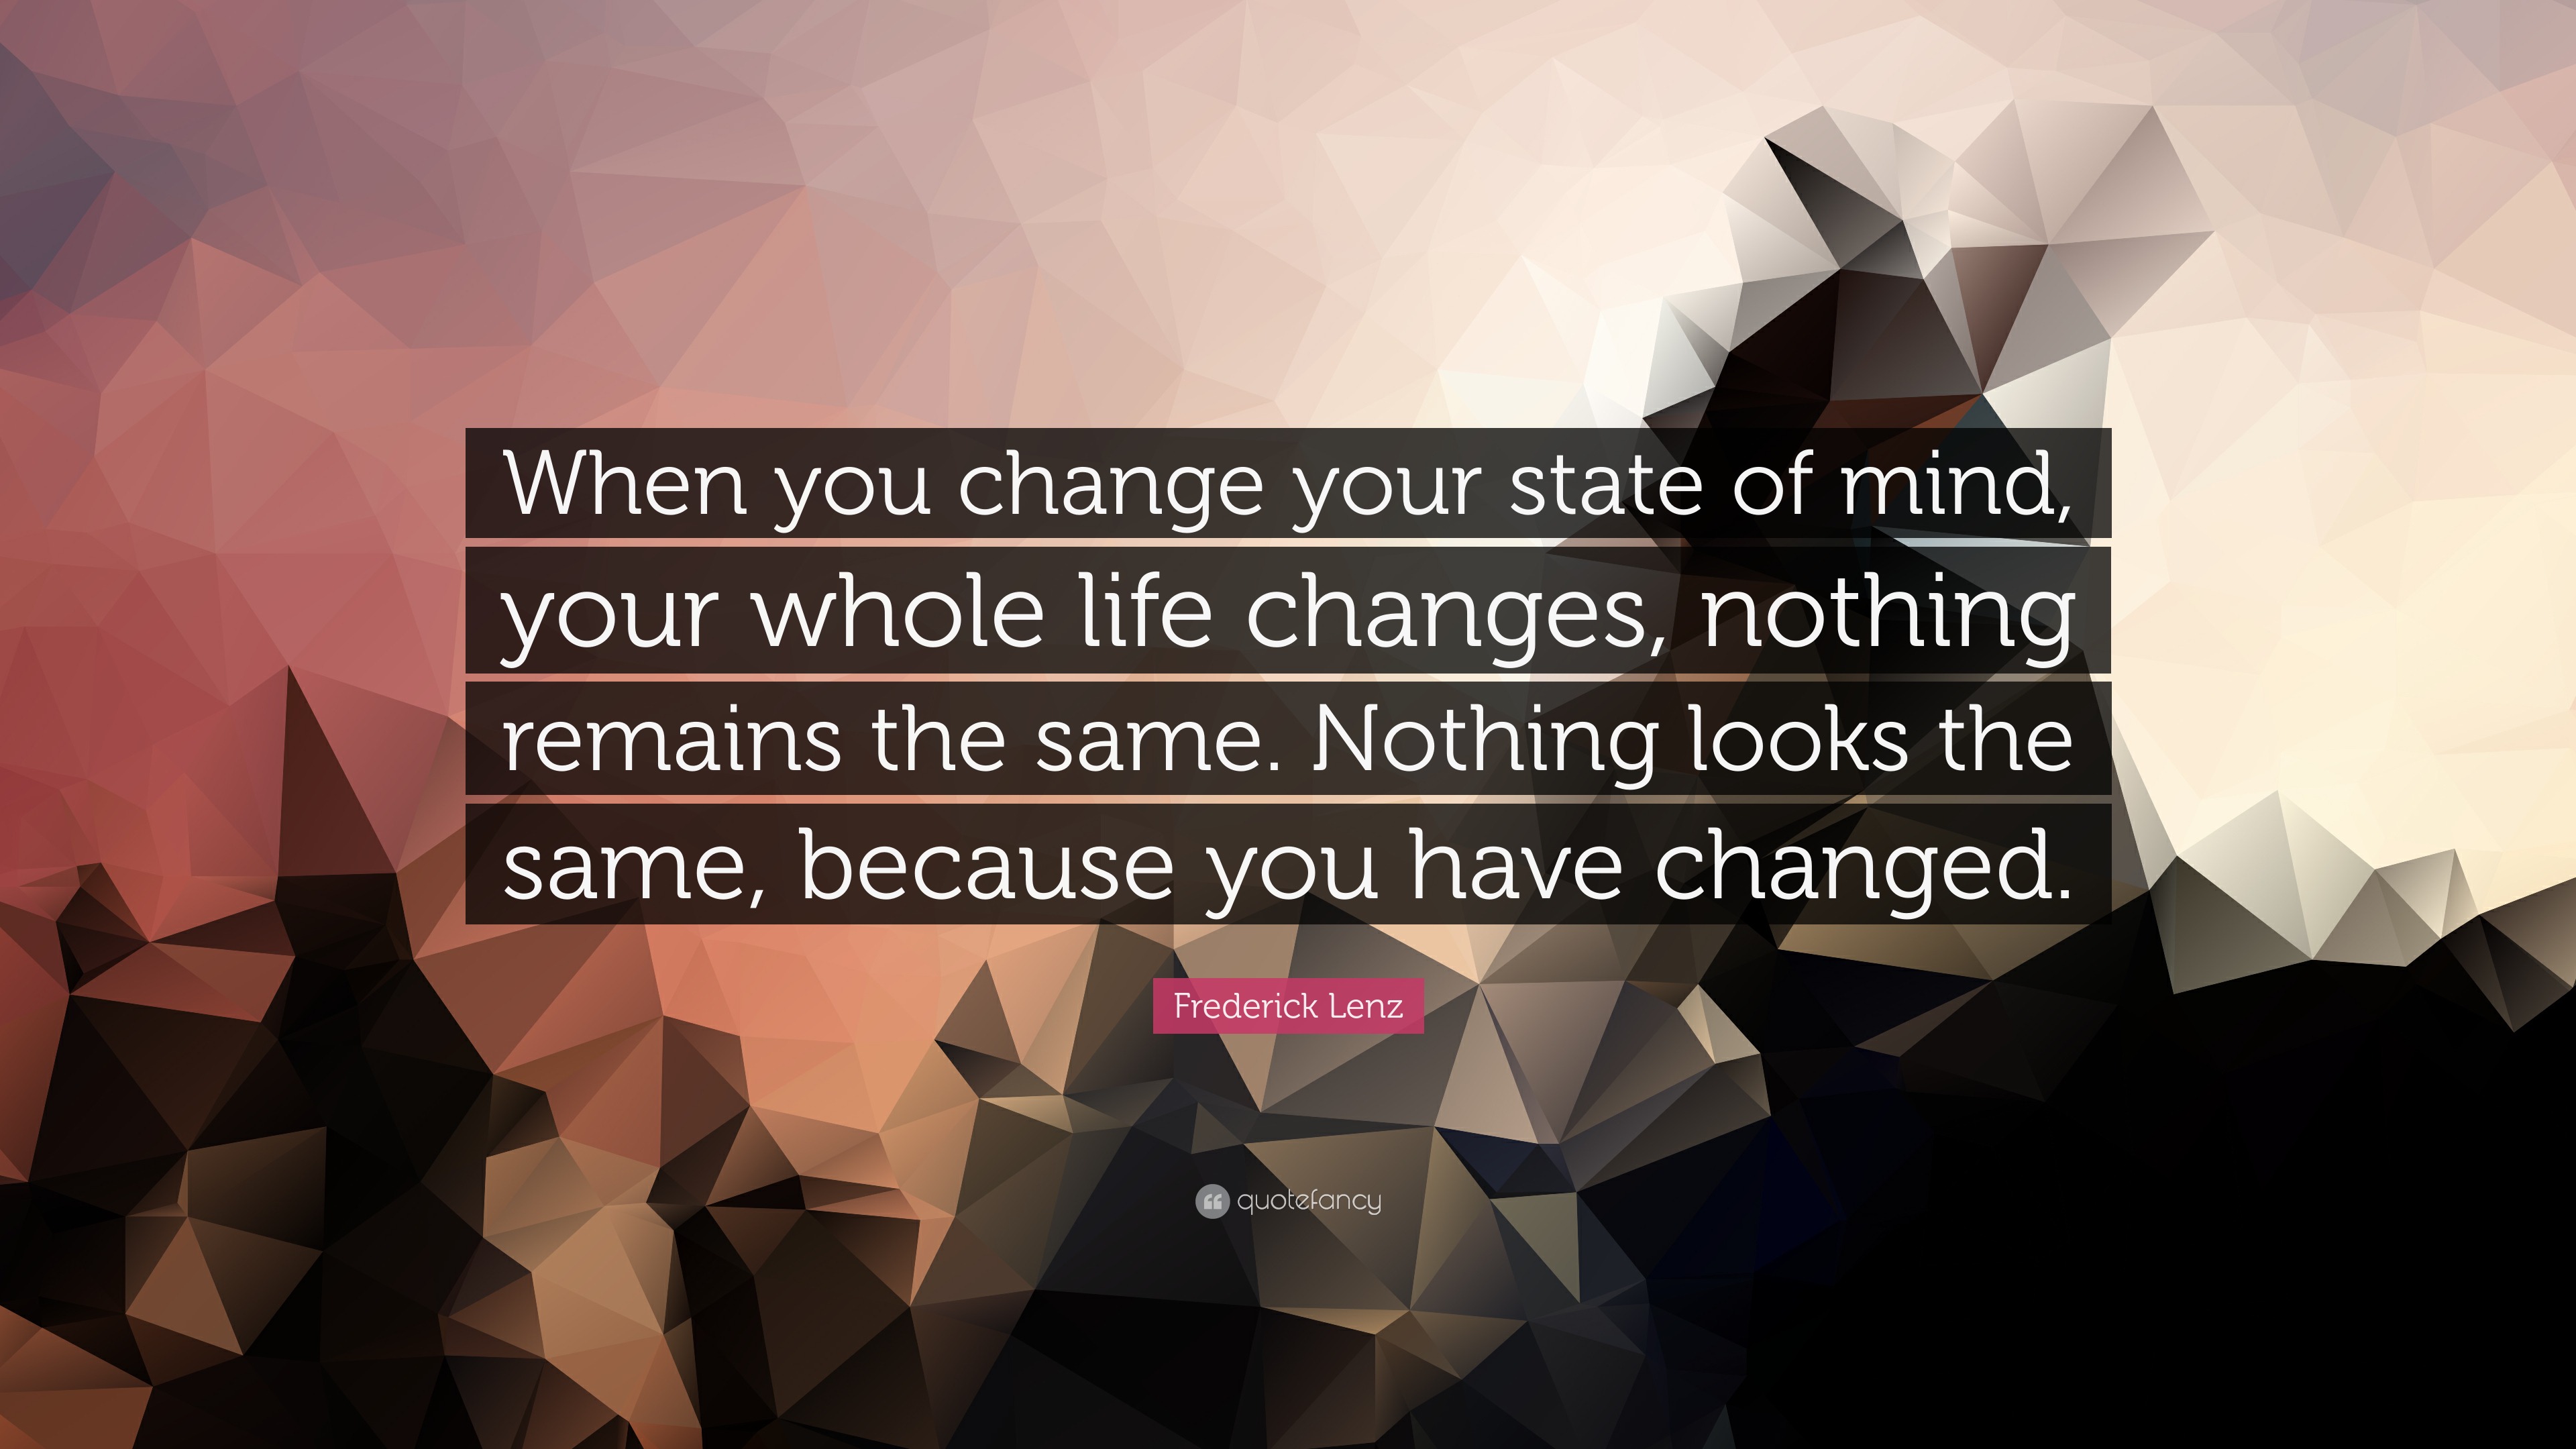 Frederick Lenz Quote: “When you change your state of mind, your whole life  changes, nothing remains the same. Nothing looks the same, because y”